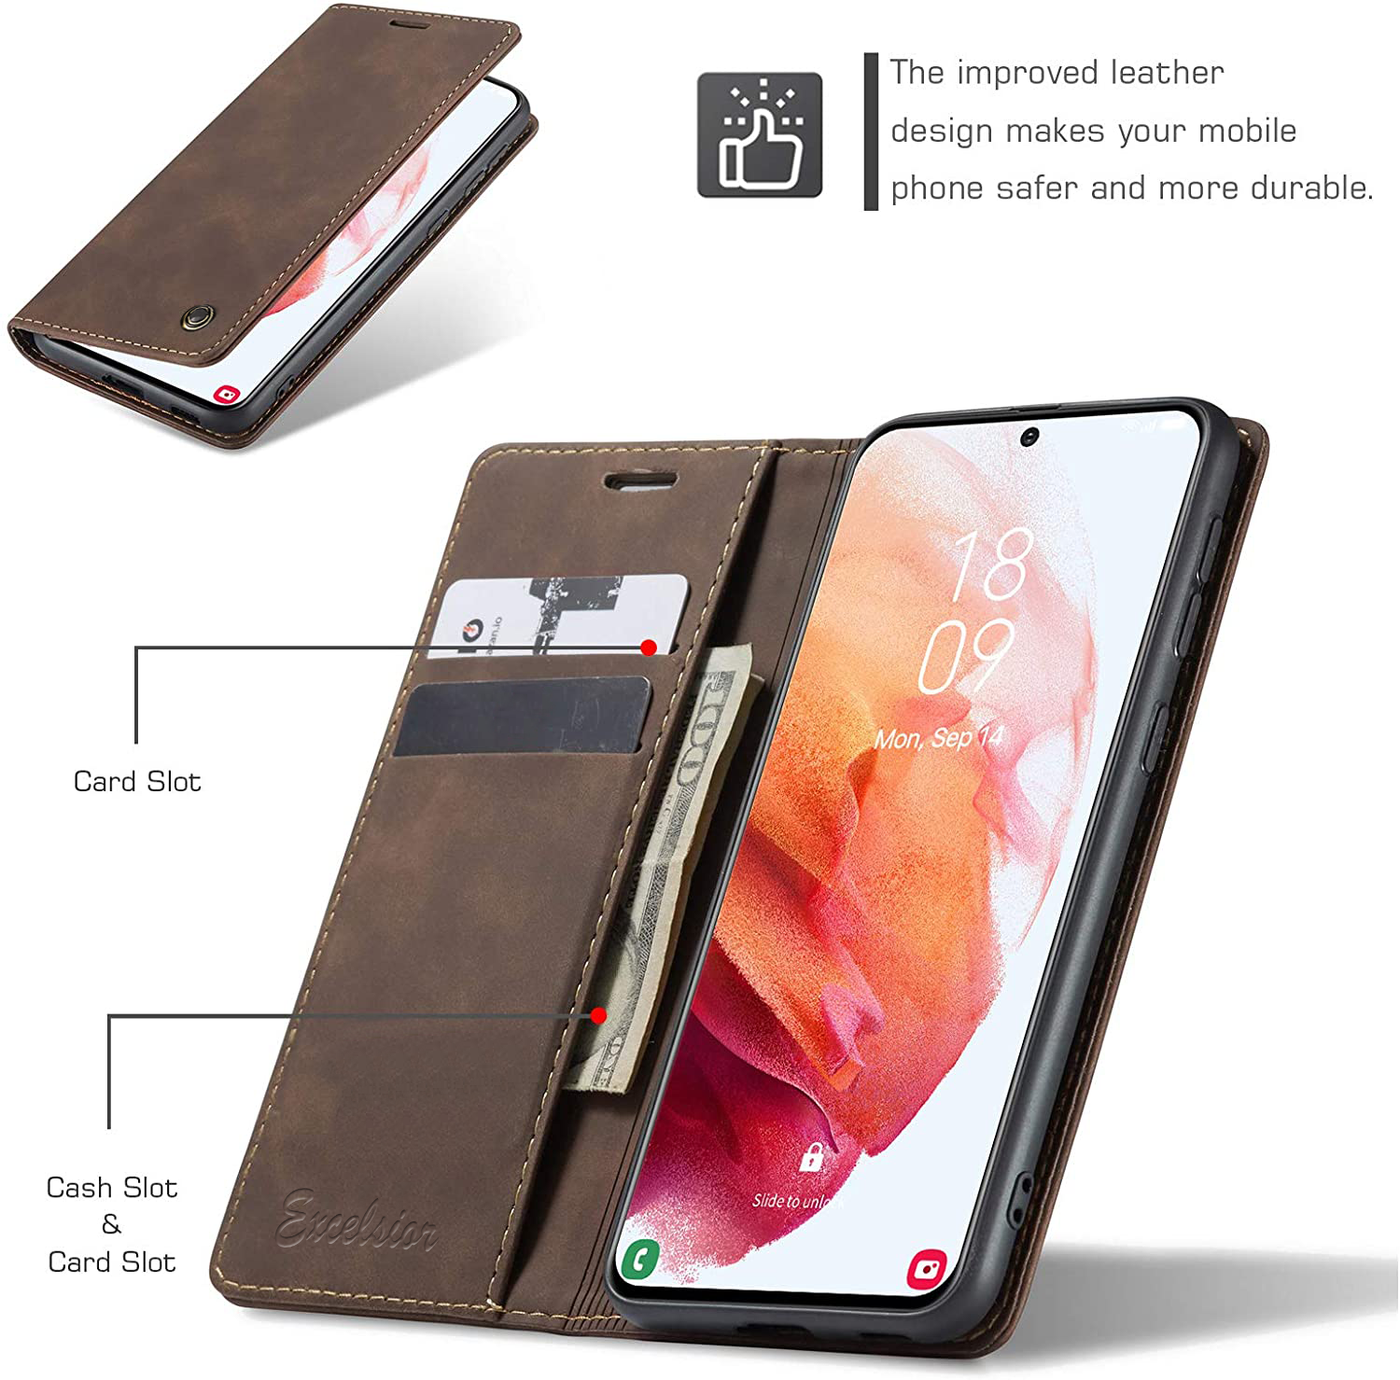 Samsung Galaxy S21 Plus 5G Leather Wallet flip case cover with card slots by Excelsior 